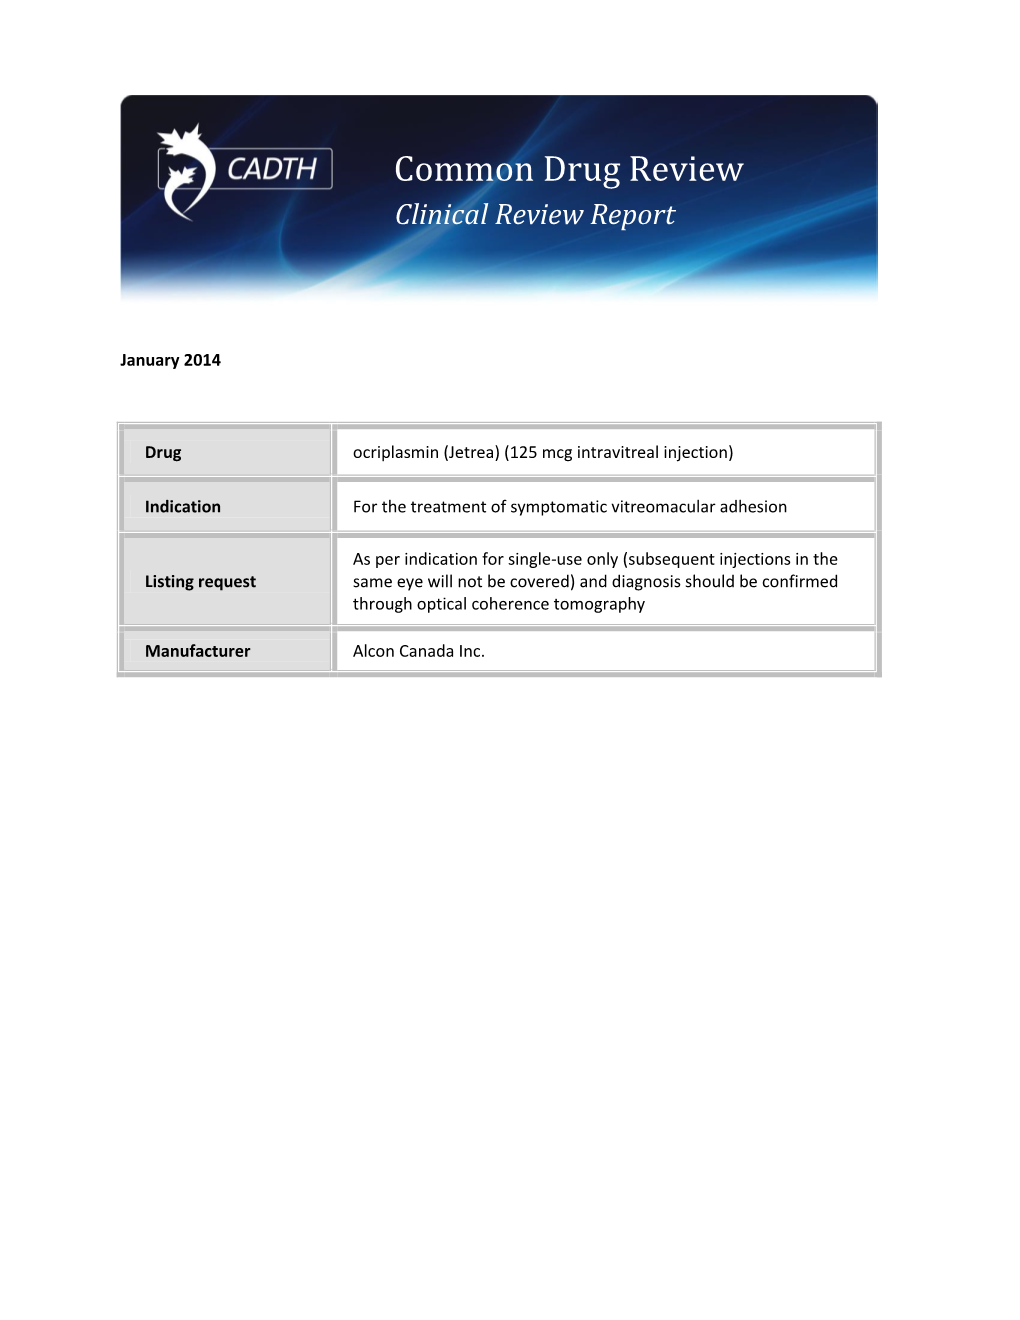 Clinical Review Report – Ocriplasmin (Jetrea) (125 Mcg Intravitreal Injection)